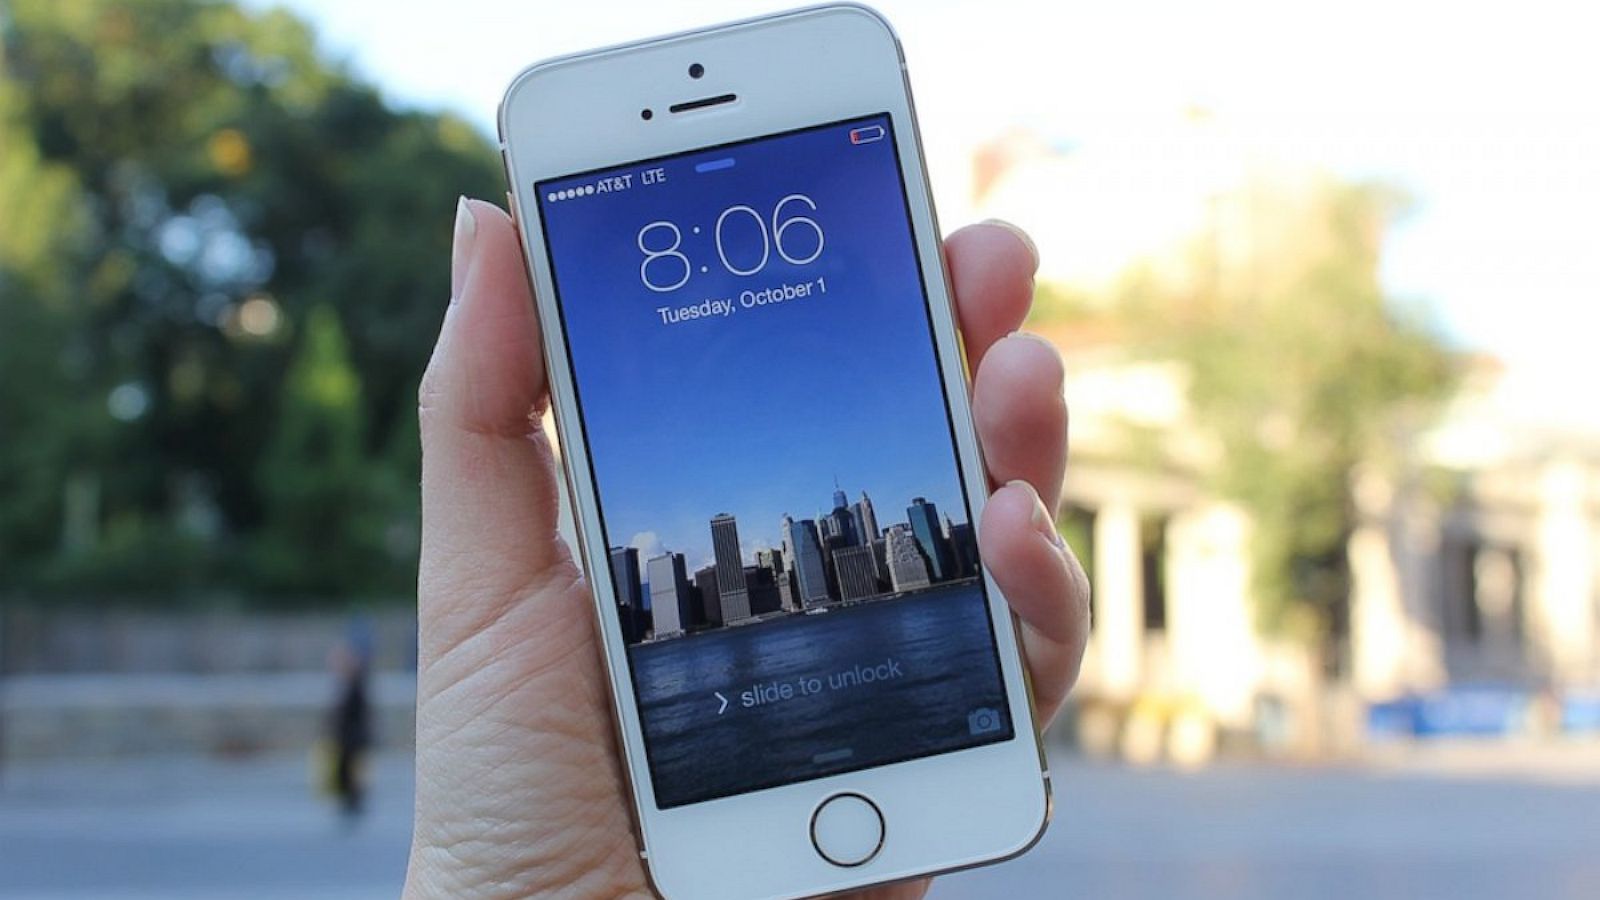 iPhone 5s Review: Great Some More Forward Thinking - ABC News